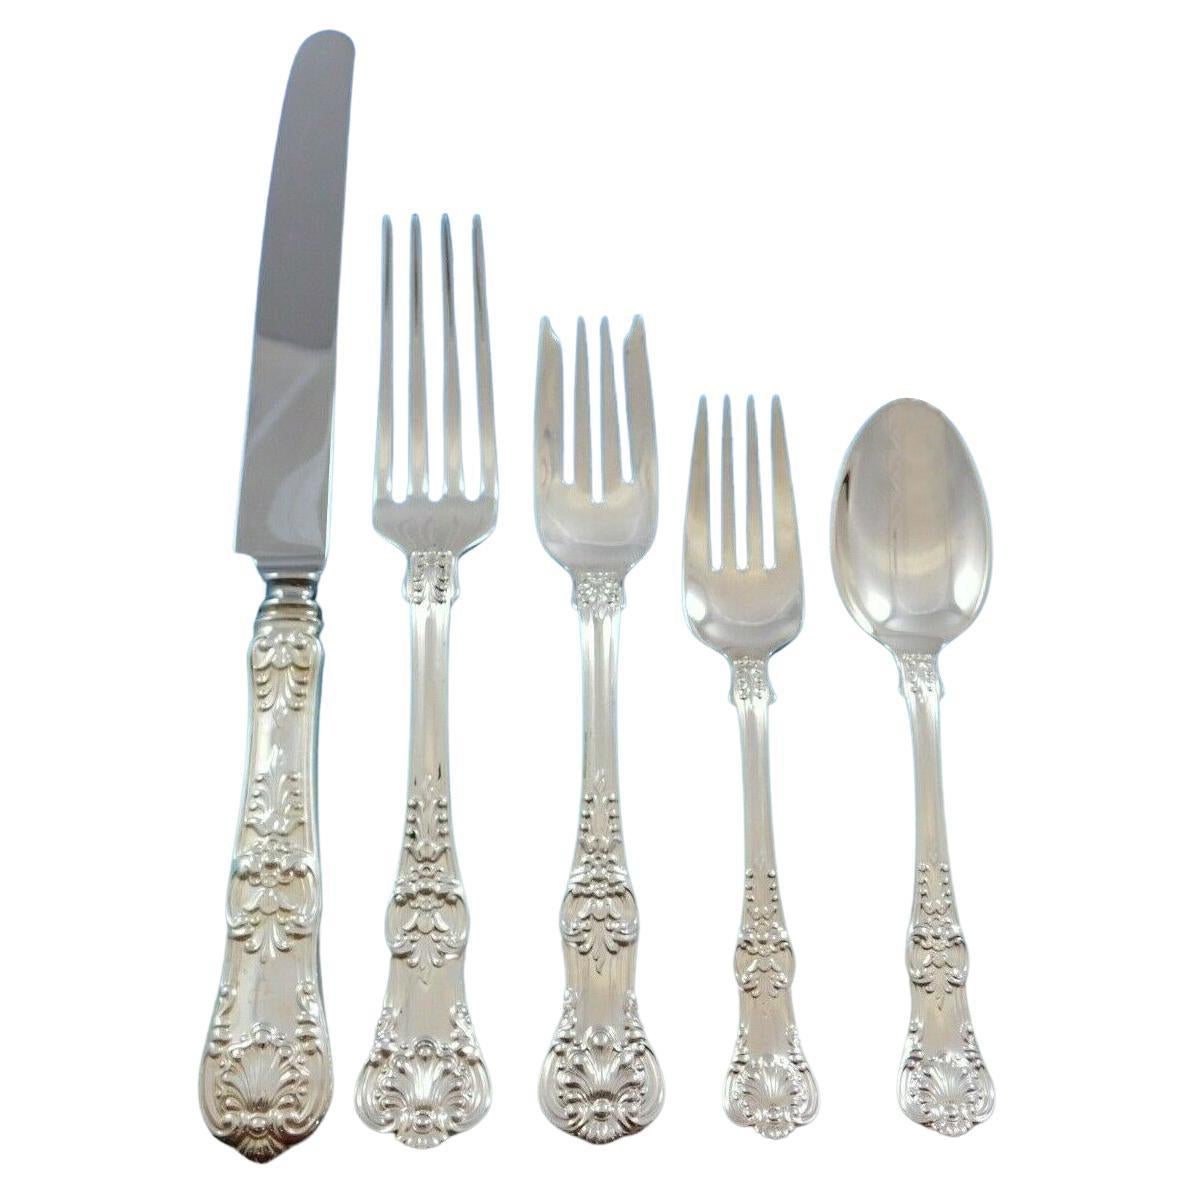 English King by Tiffany & Co Sterling Silver Flatware Set Service 63 pcs Dinner